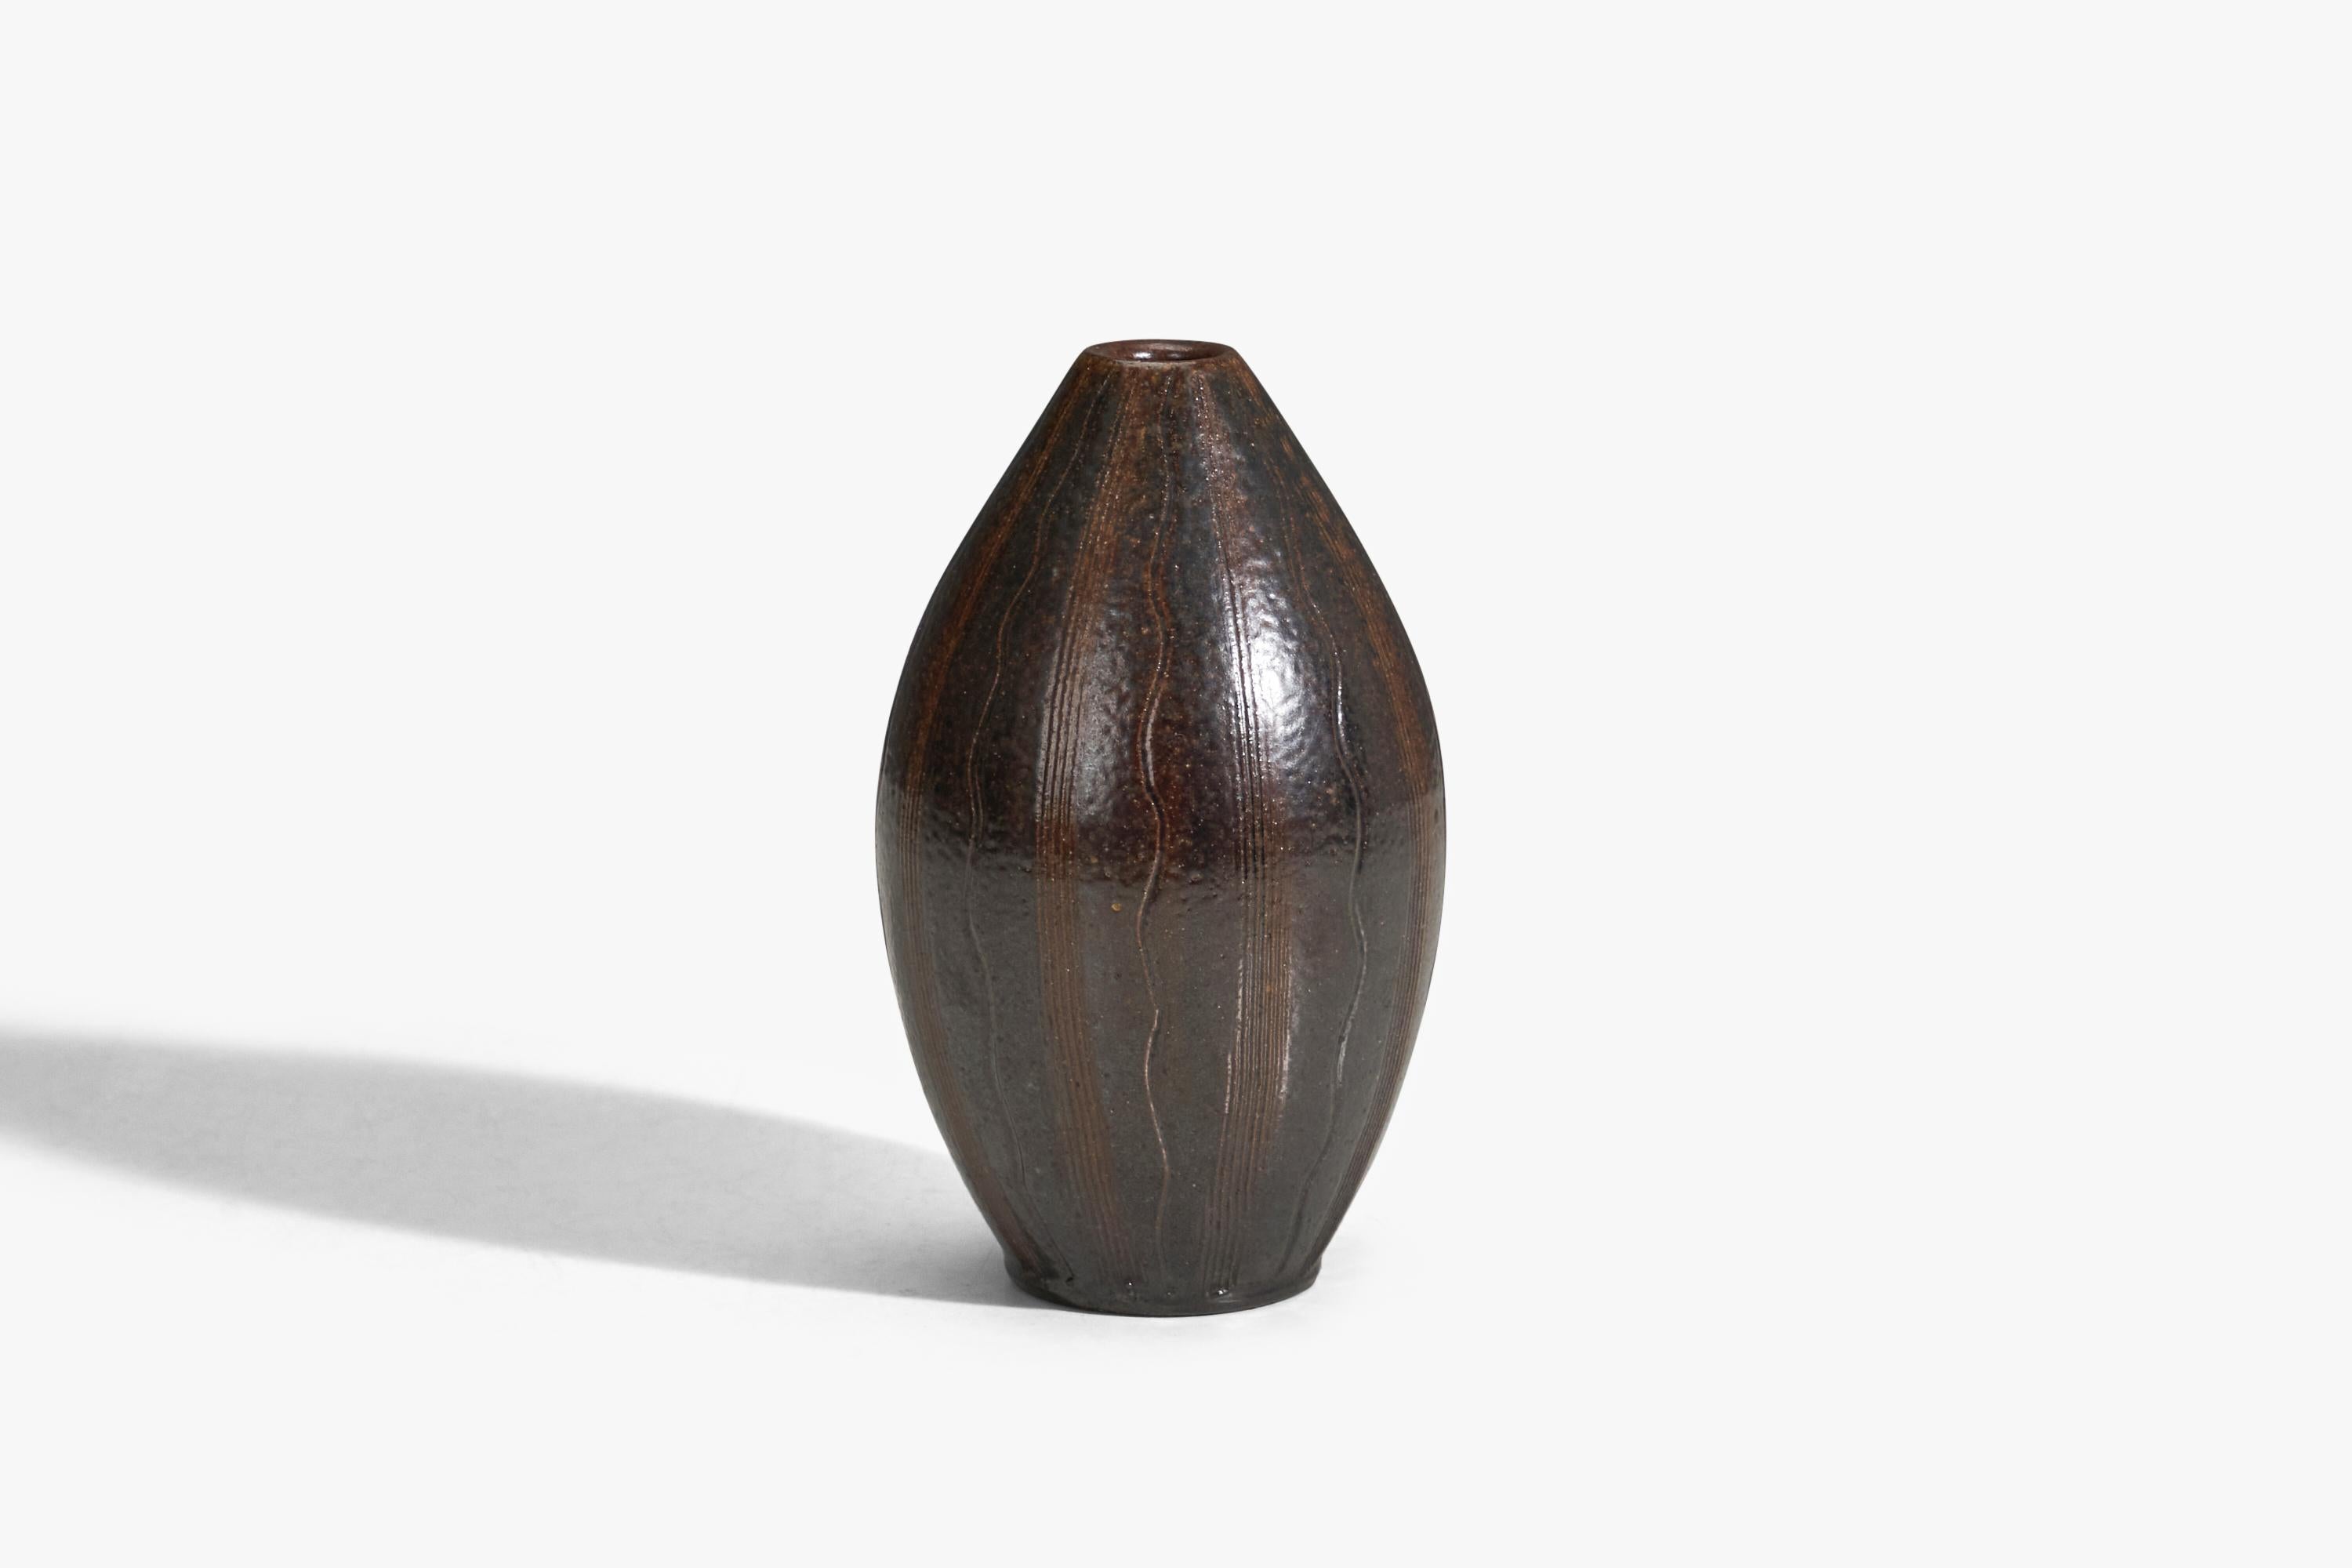 A brown glazed stoneware vase designed by Arthur Andersson and produced by Wallåkra, Sweden, 1950s.